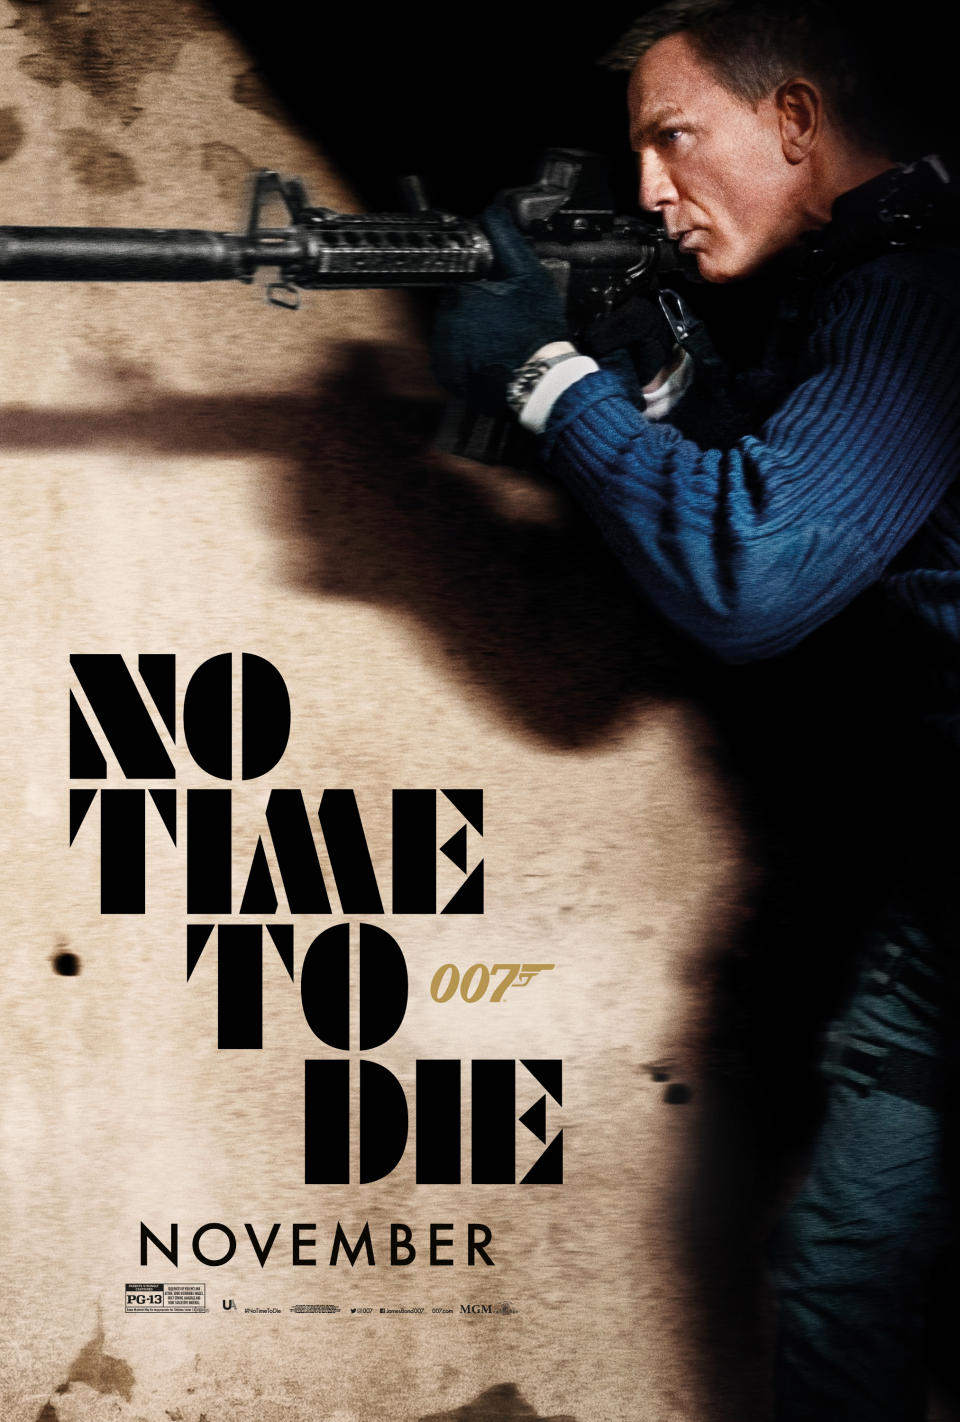 Date die release to malaysia time no No Time